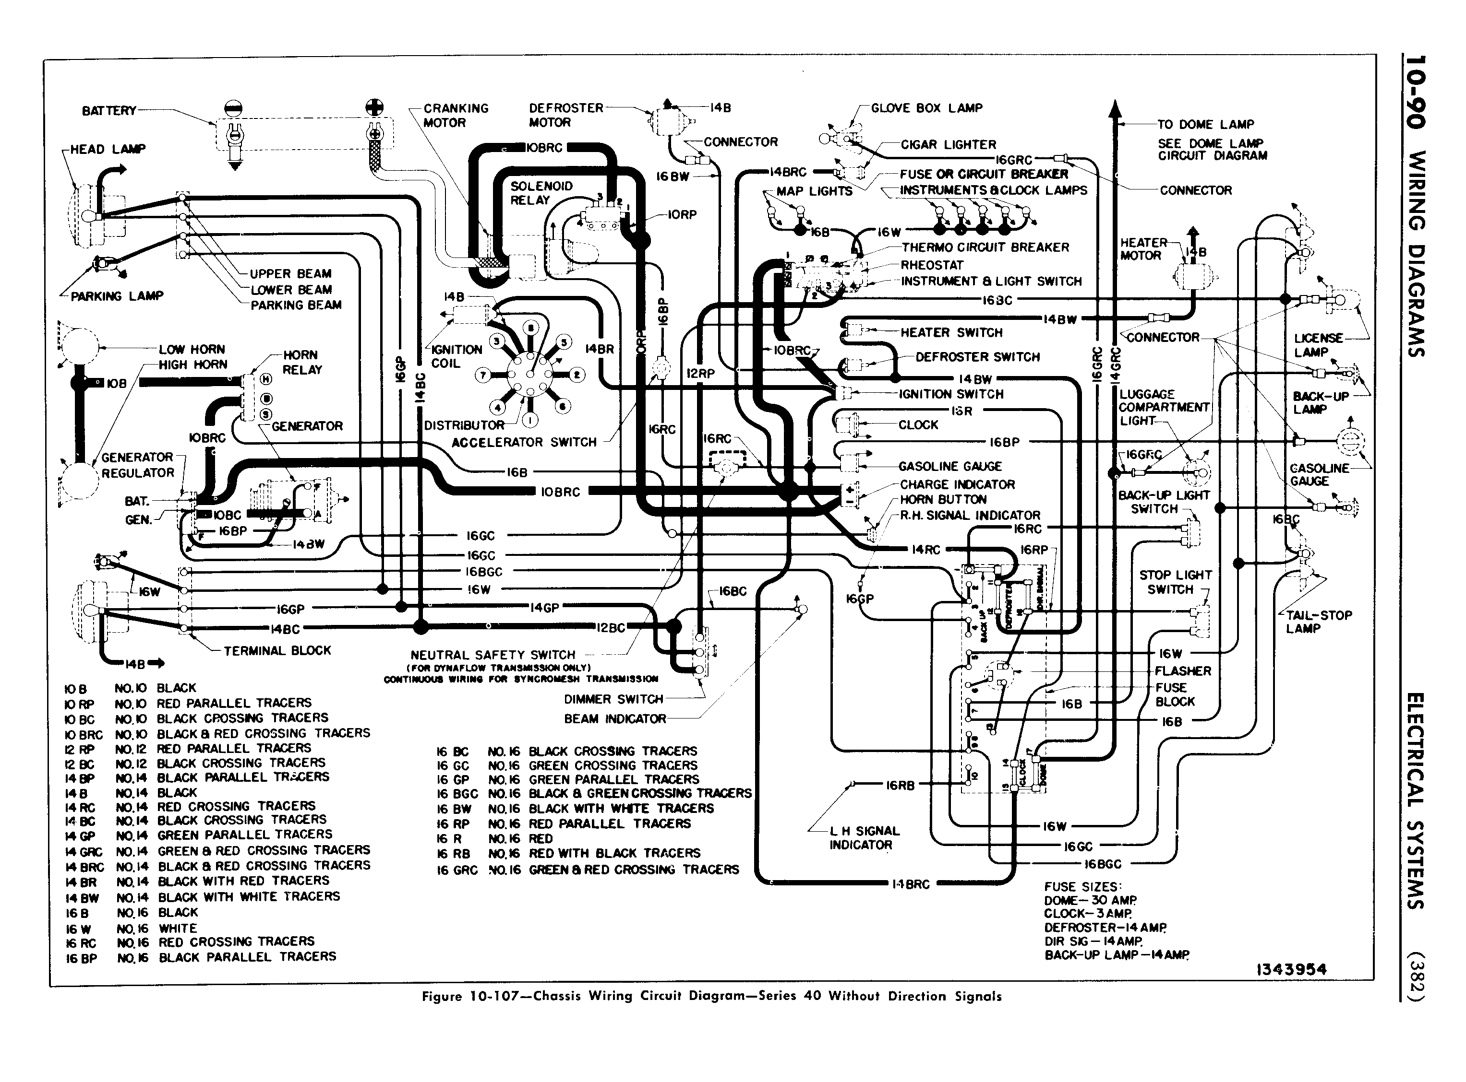 n_11 1951 Buick Shop Manual - Electrical Systems-090-090.jpg